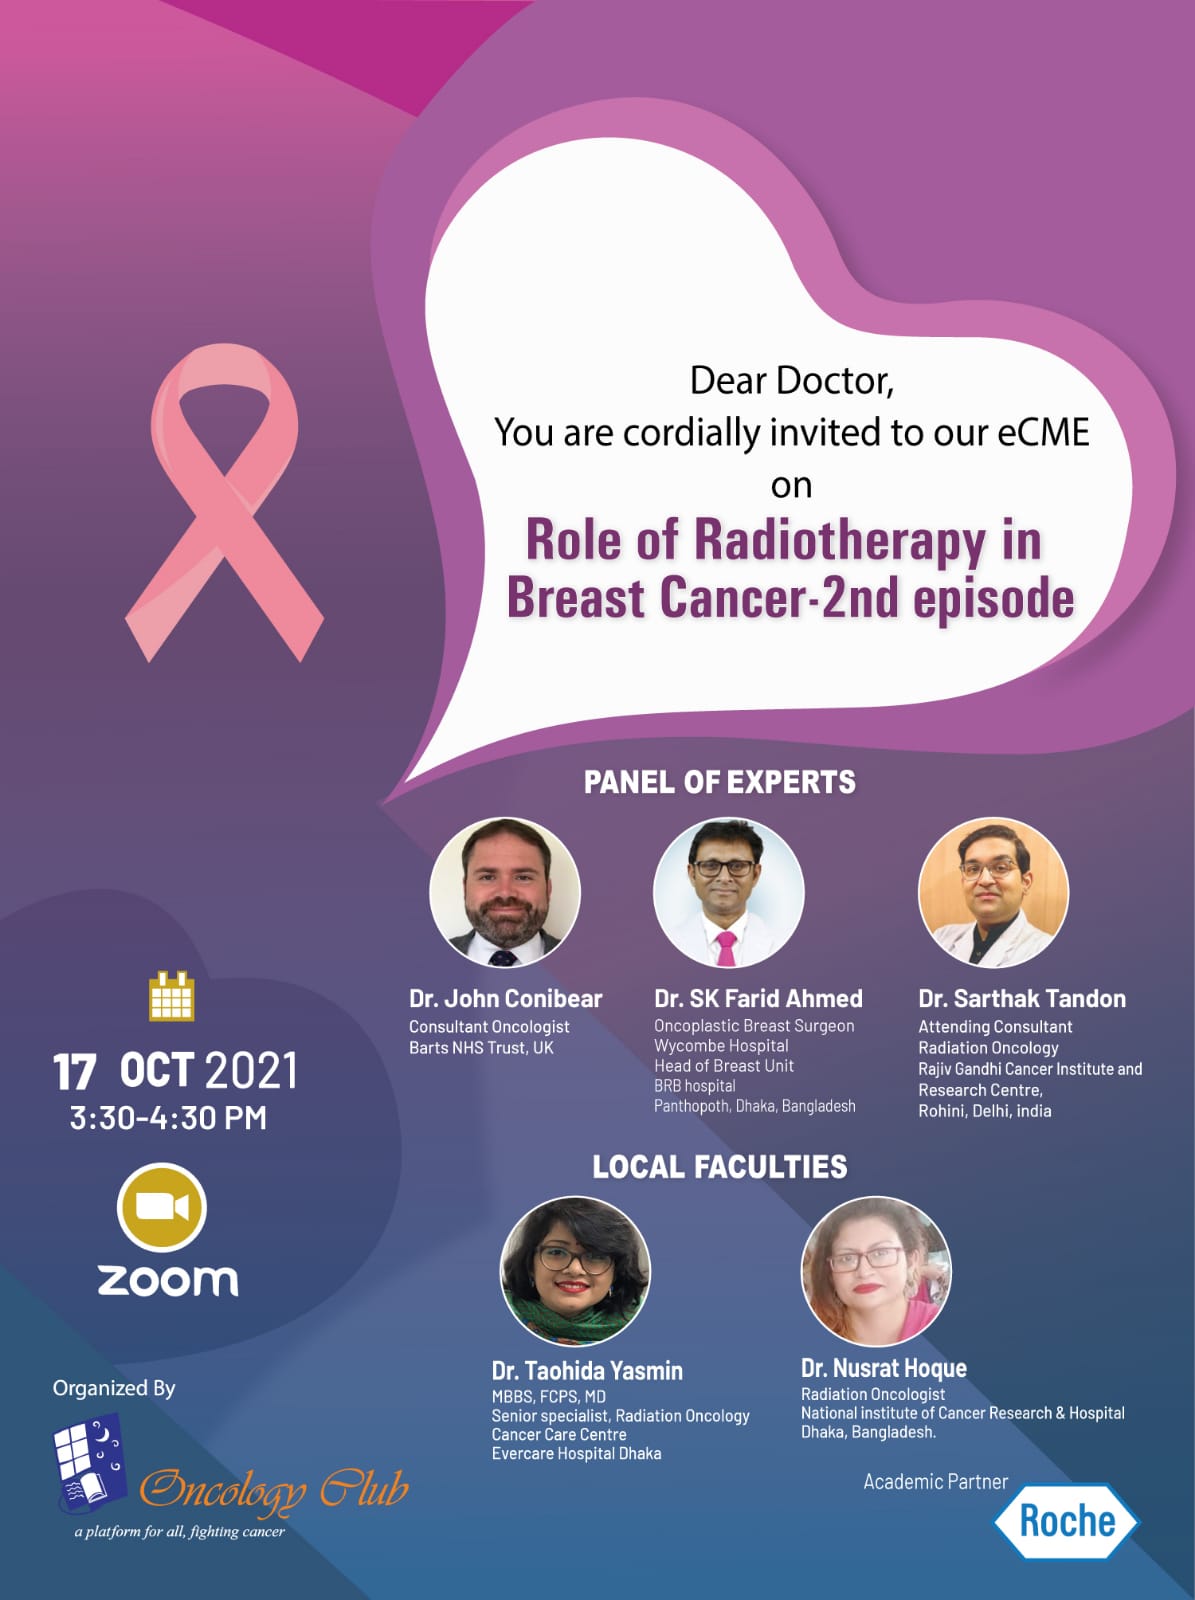 Role of RT in Breast Cancer 2nd episode